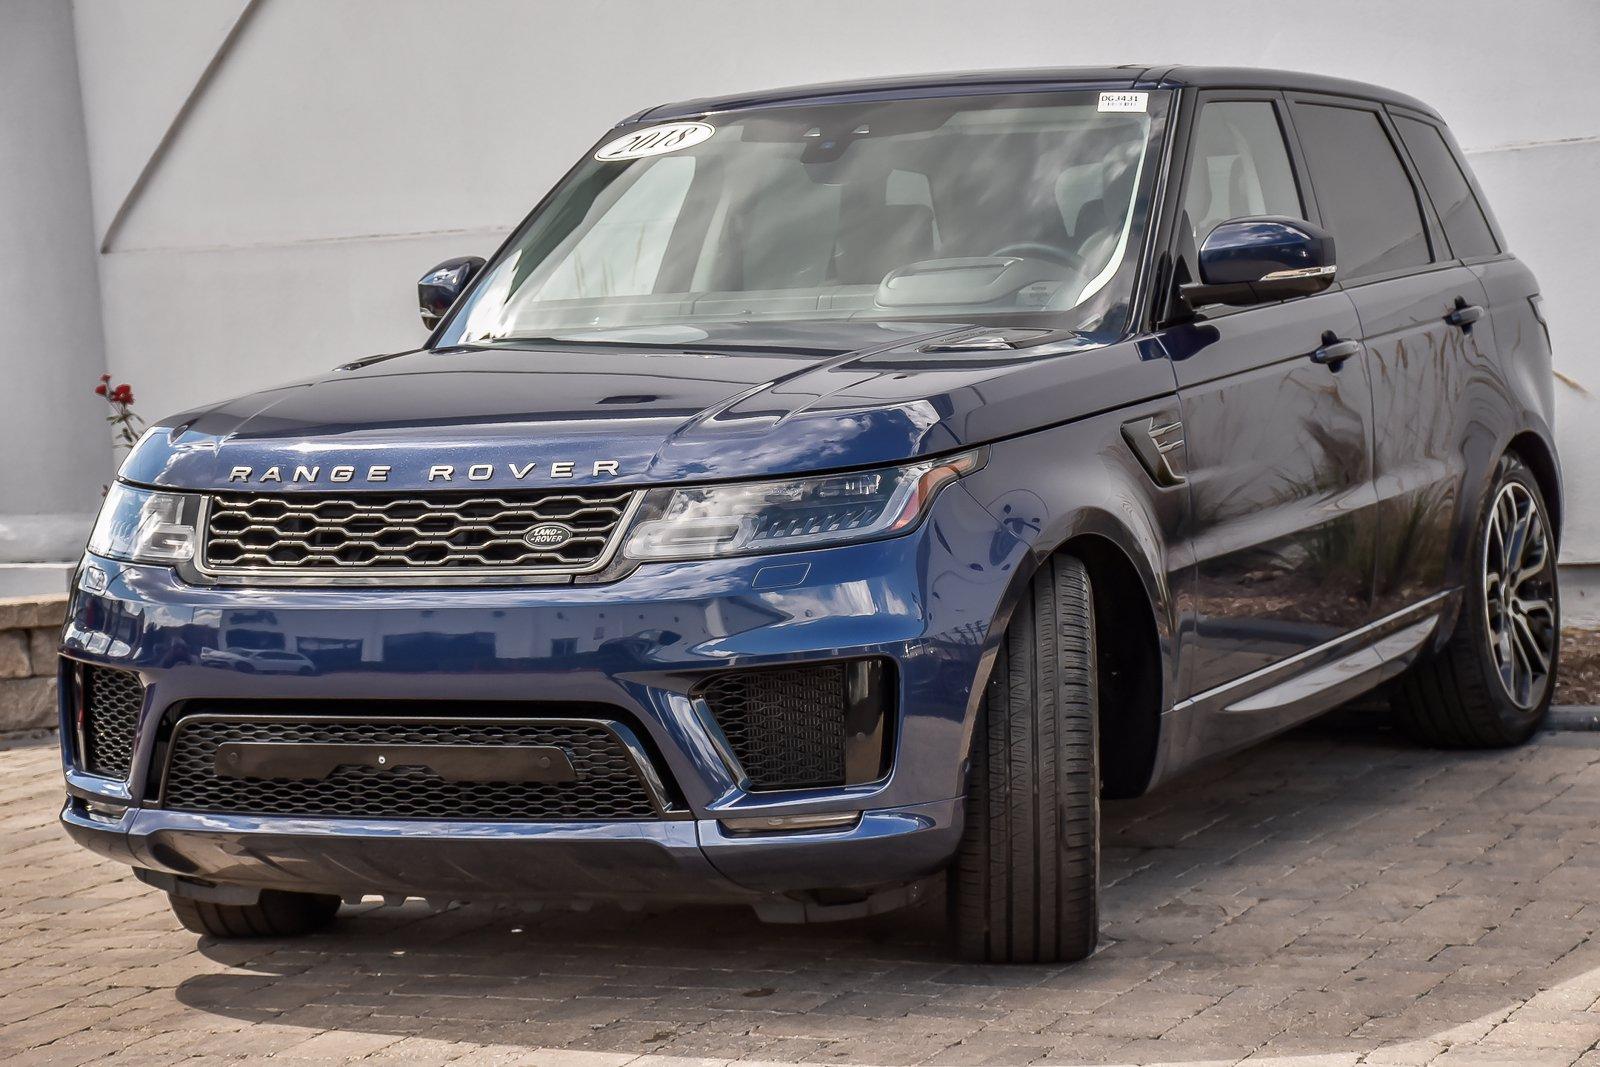 Used 2018 Land Rover Range Rover Sport Supercharged Dynamic | Downers Grove, IL